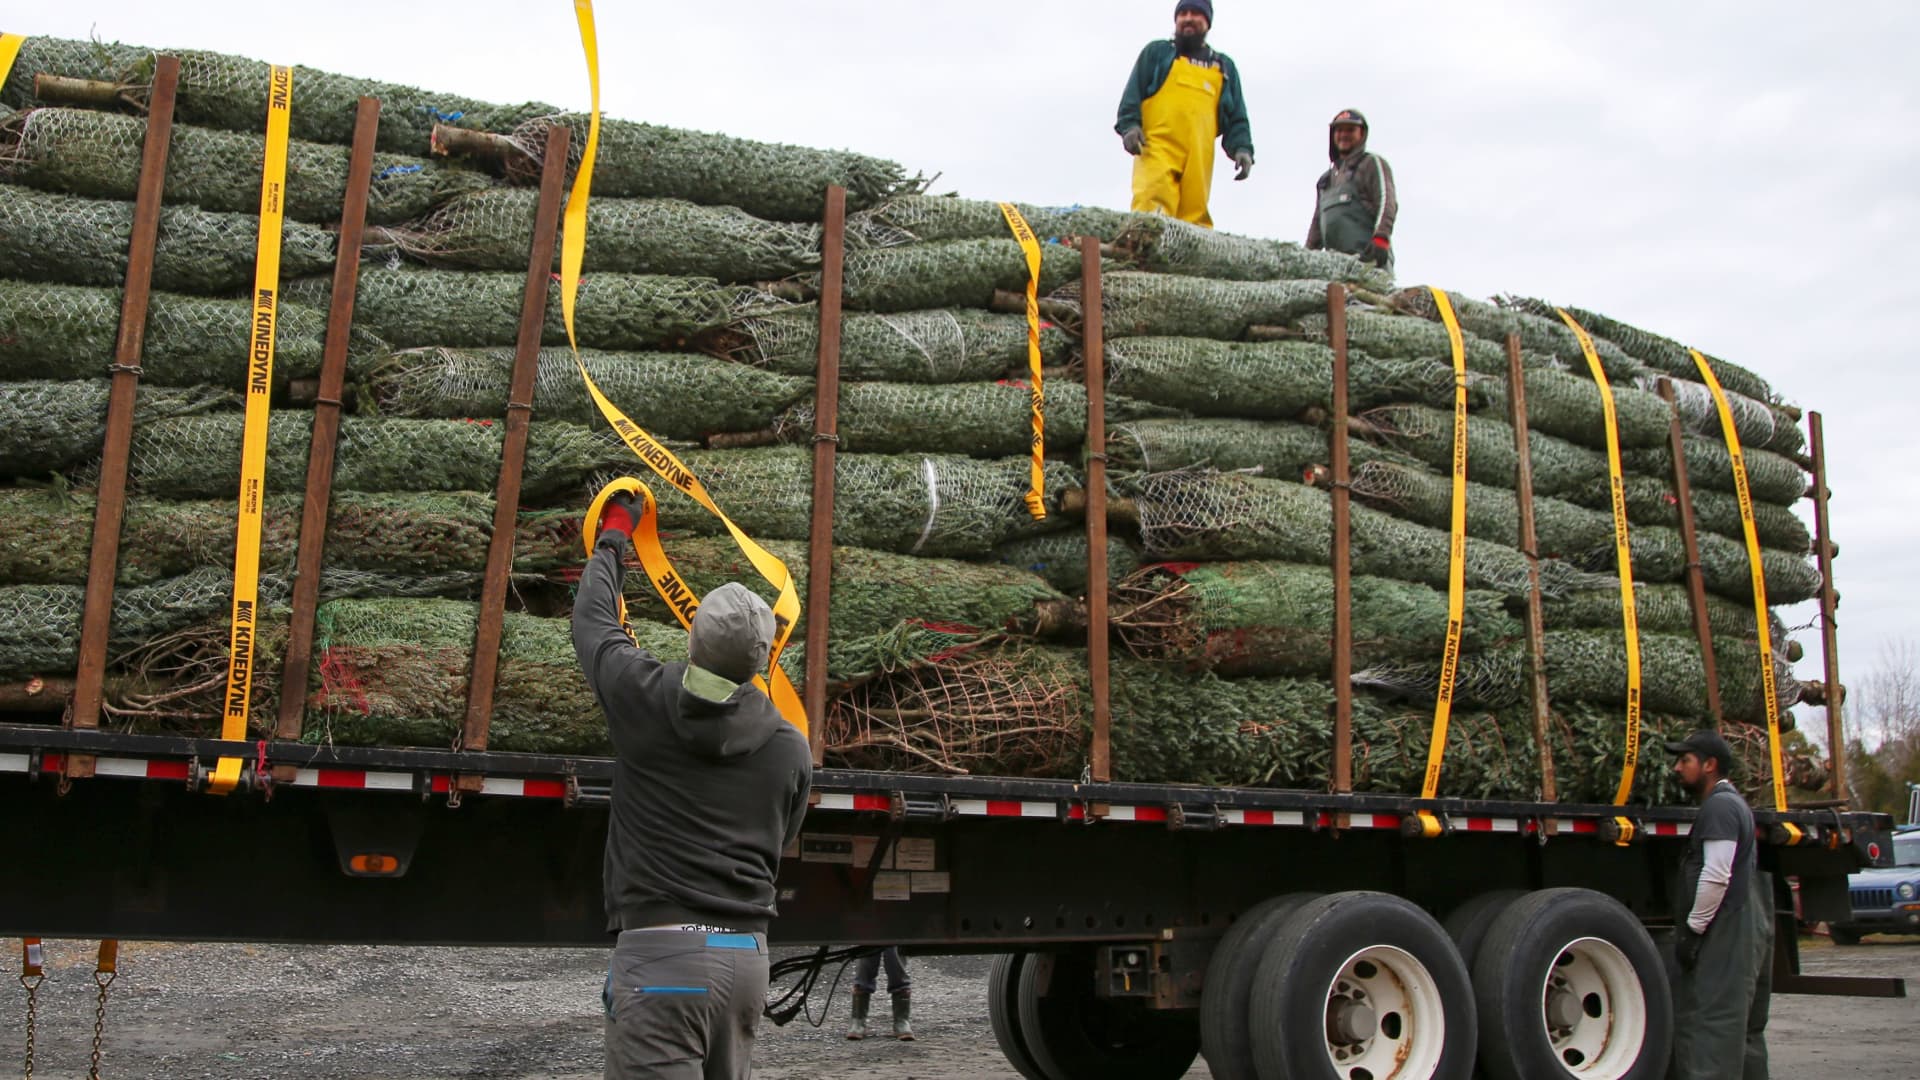 Christmas trees loaded onto a truck for shipping at Downey Tree Farm and Nursery in Hatley, Quebec, Canada November 12, 2021.